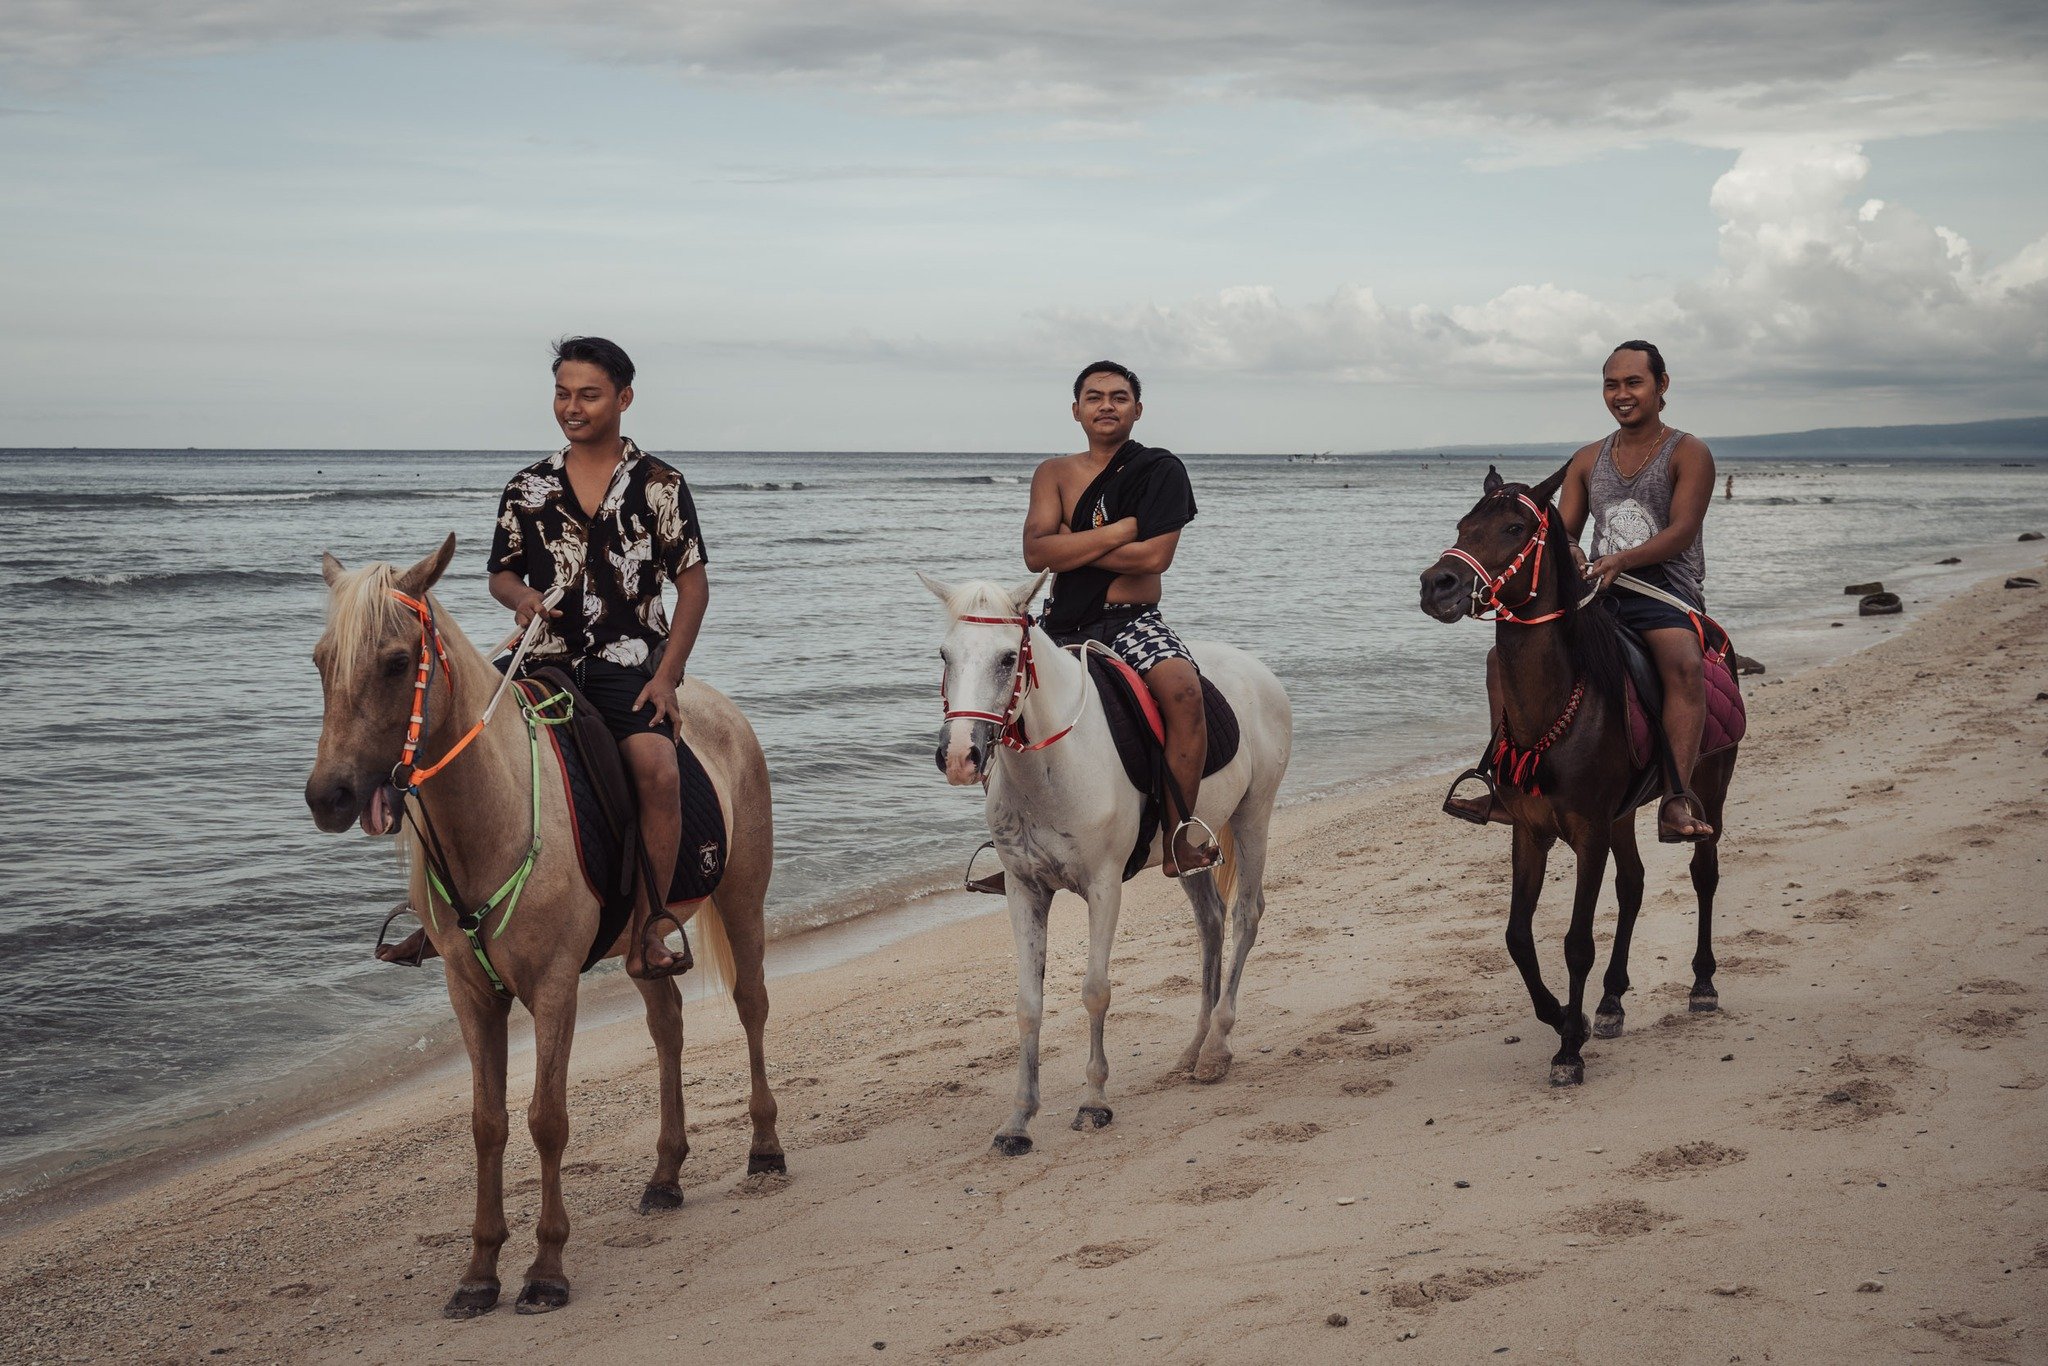 Gili Trawangan, a small island off the northwest coast of Lombok, Indonesia, is known for its unique transportation system and horse culture. One evening, after spending the day exploring the island on a bicycle, the second mode of transport on the i